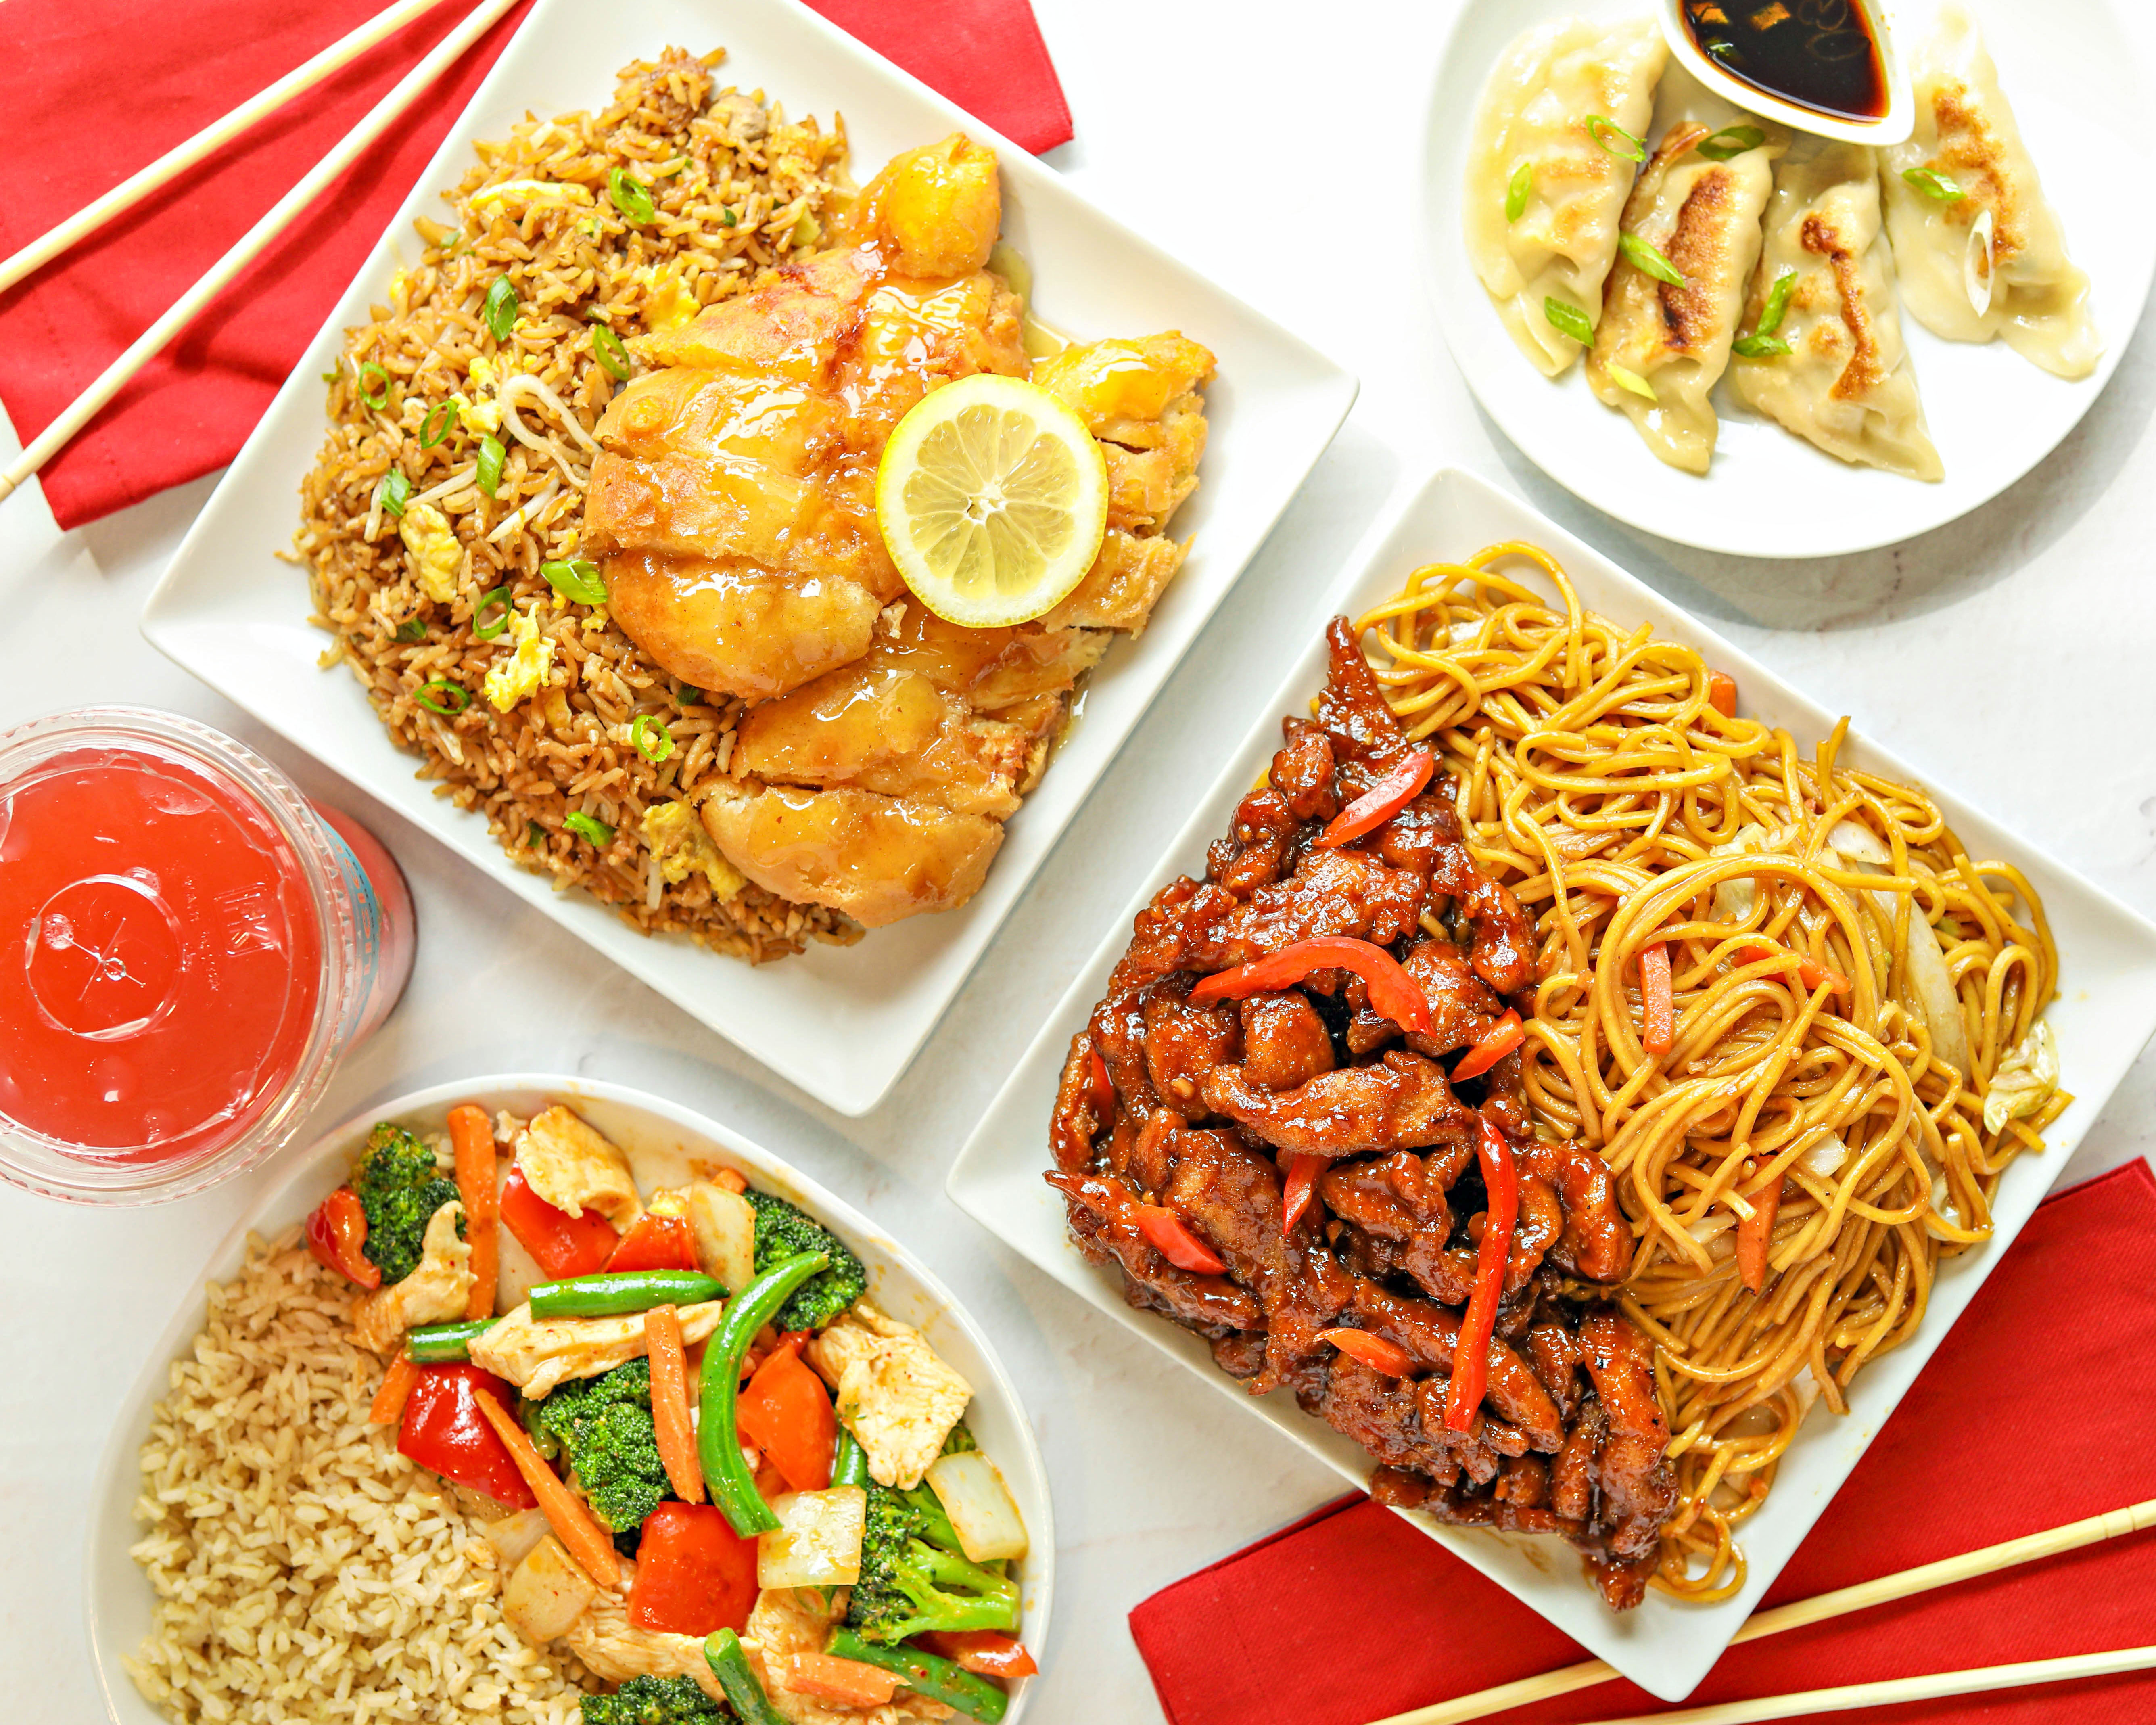 Leeann Chin's Menu: Prices and Deliver - Doordash